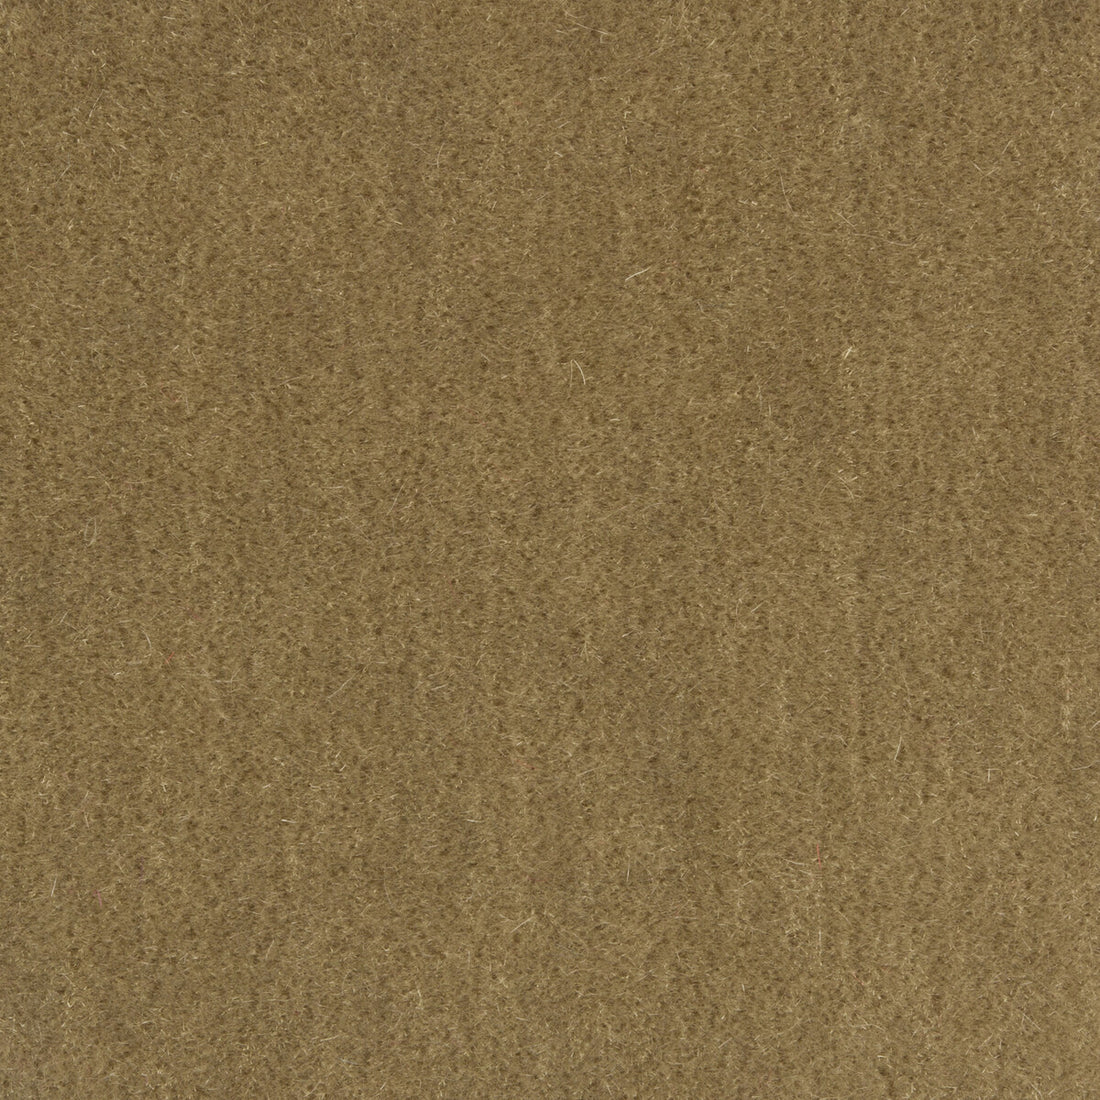 Bachelor Mohair fabric in birch color - pattern 8014101.106.0 - by Brunschwig &amp; Fils